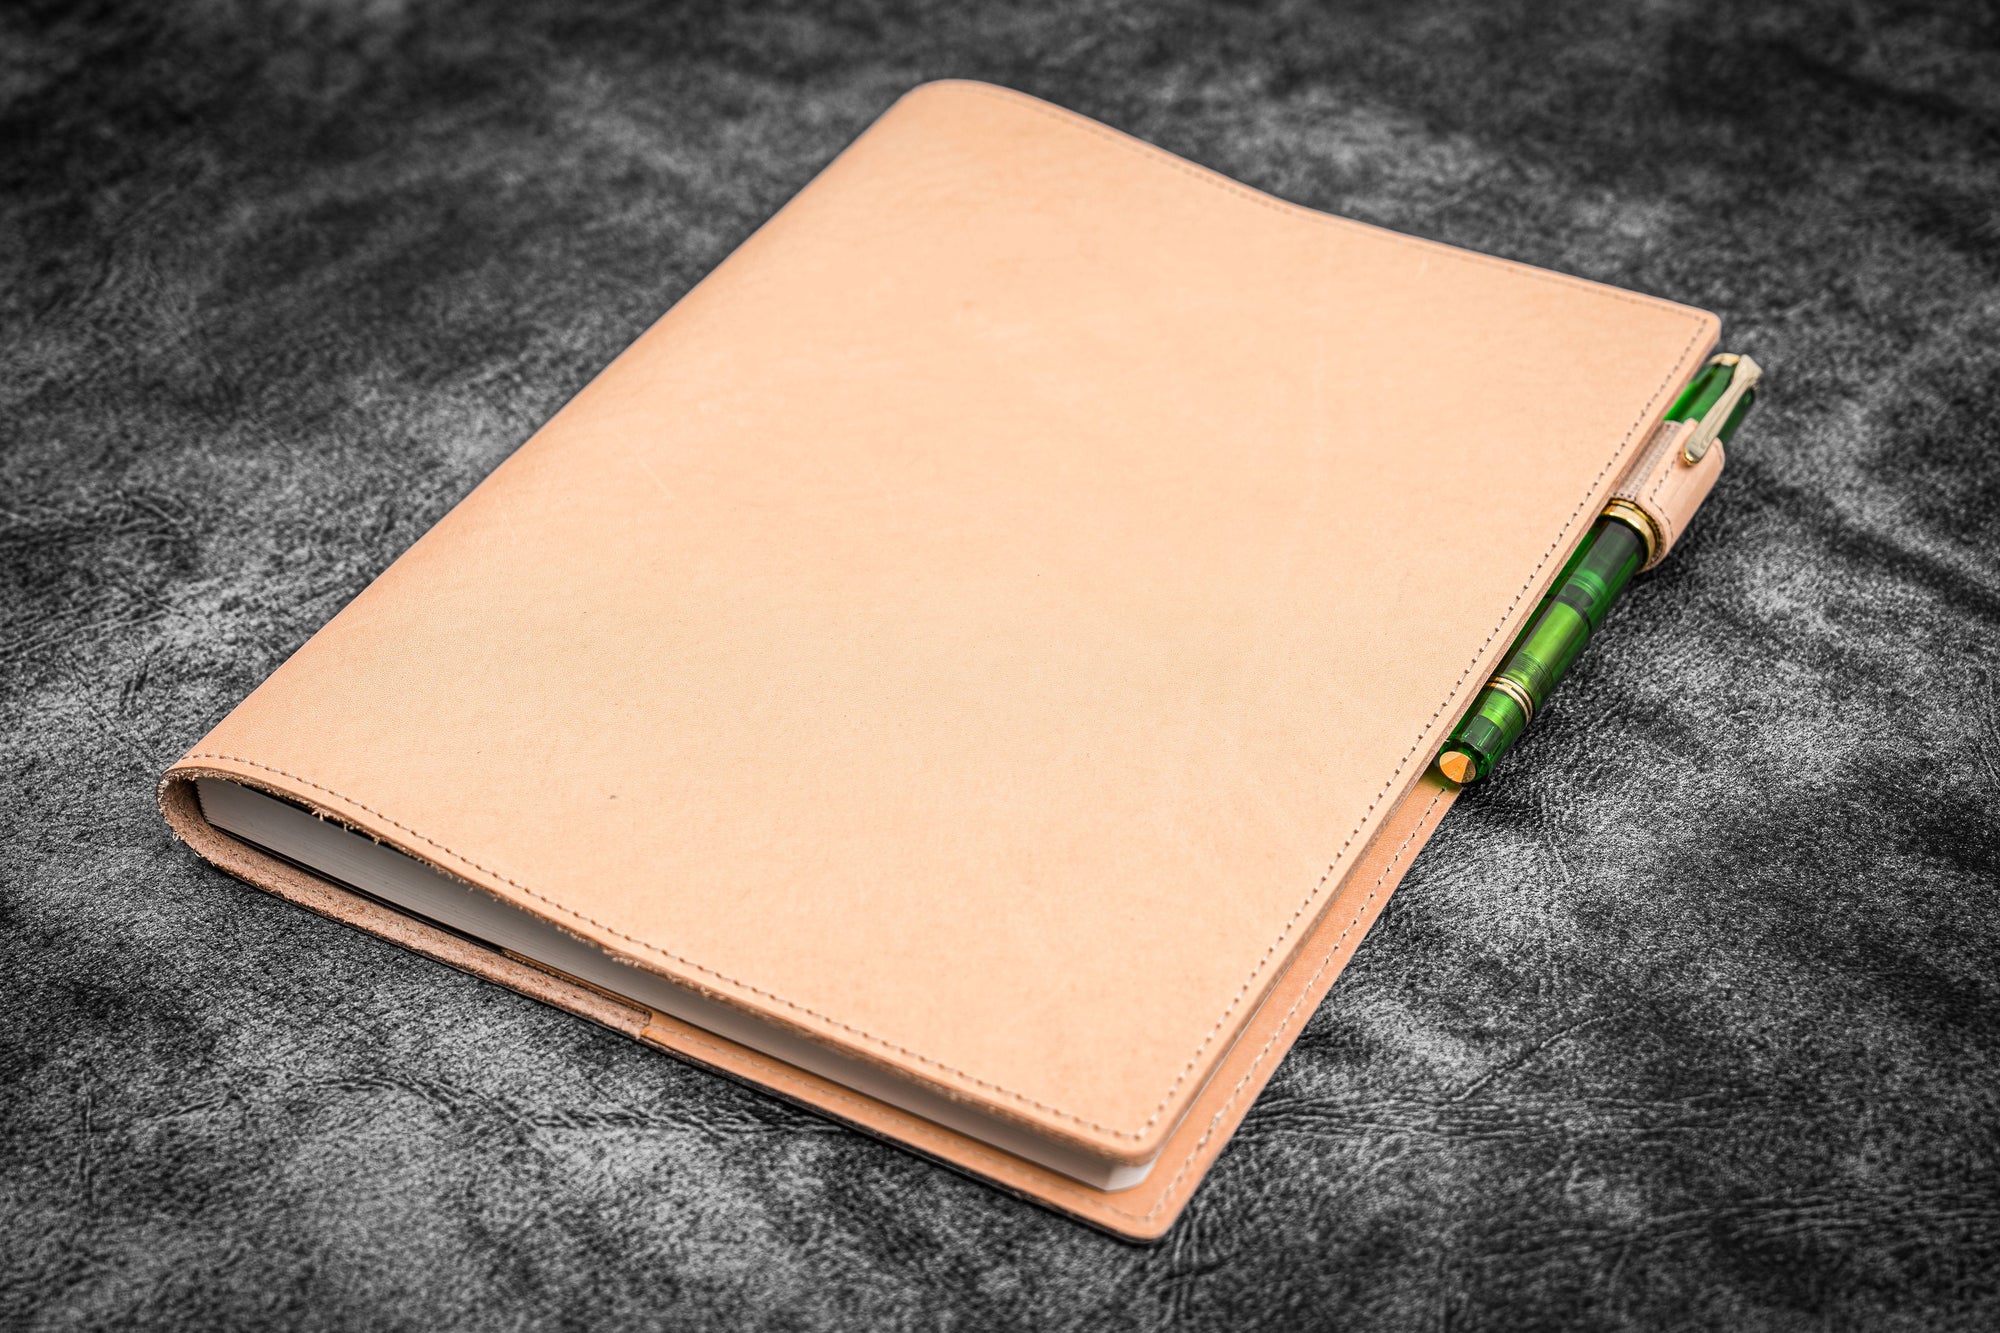 Leather Slim B5 Notebook / Planner Cover - Undyed Leather